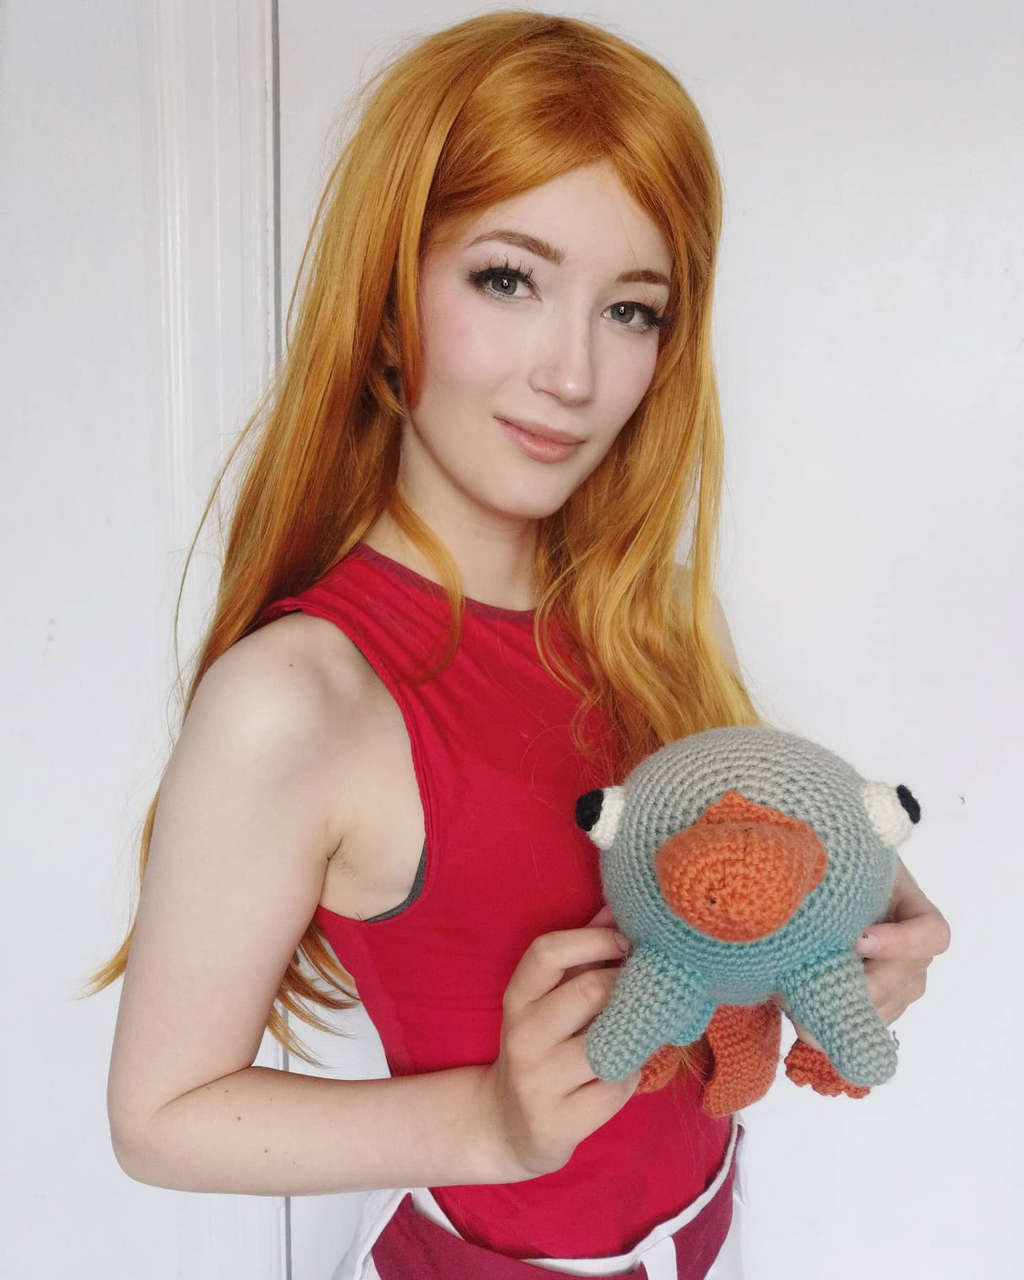 Ansocosplay As Candace Flynn From Phineas And Fer